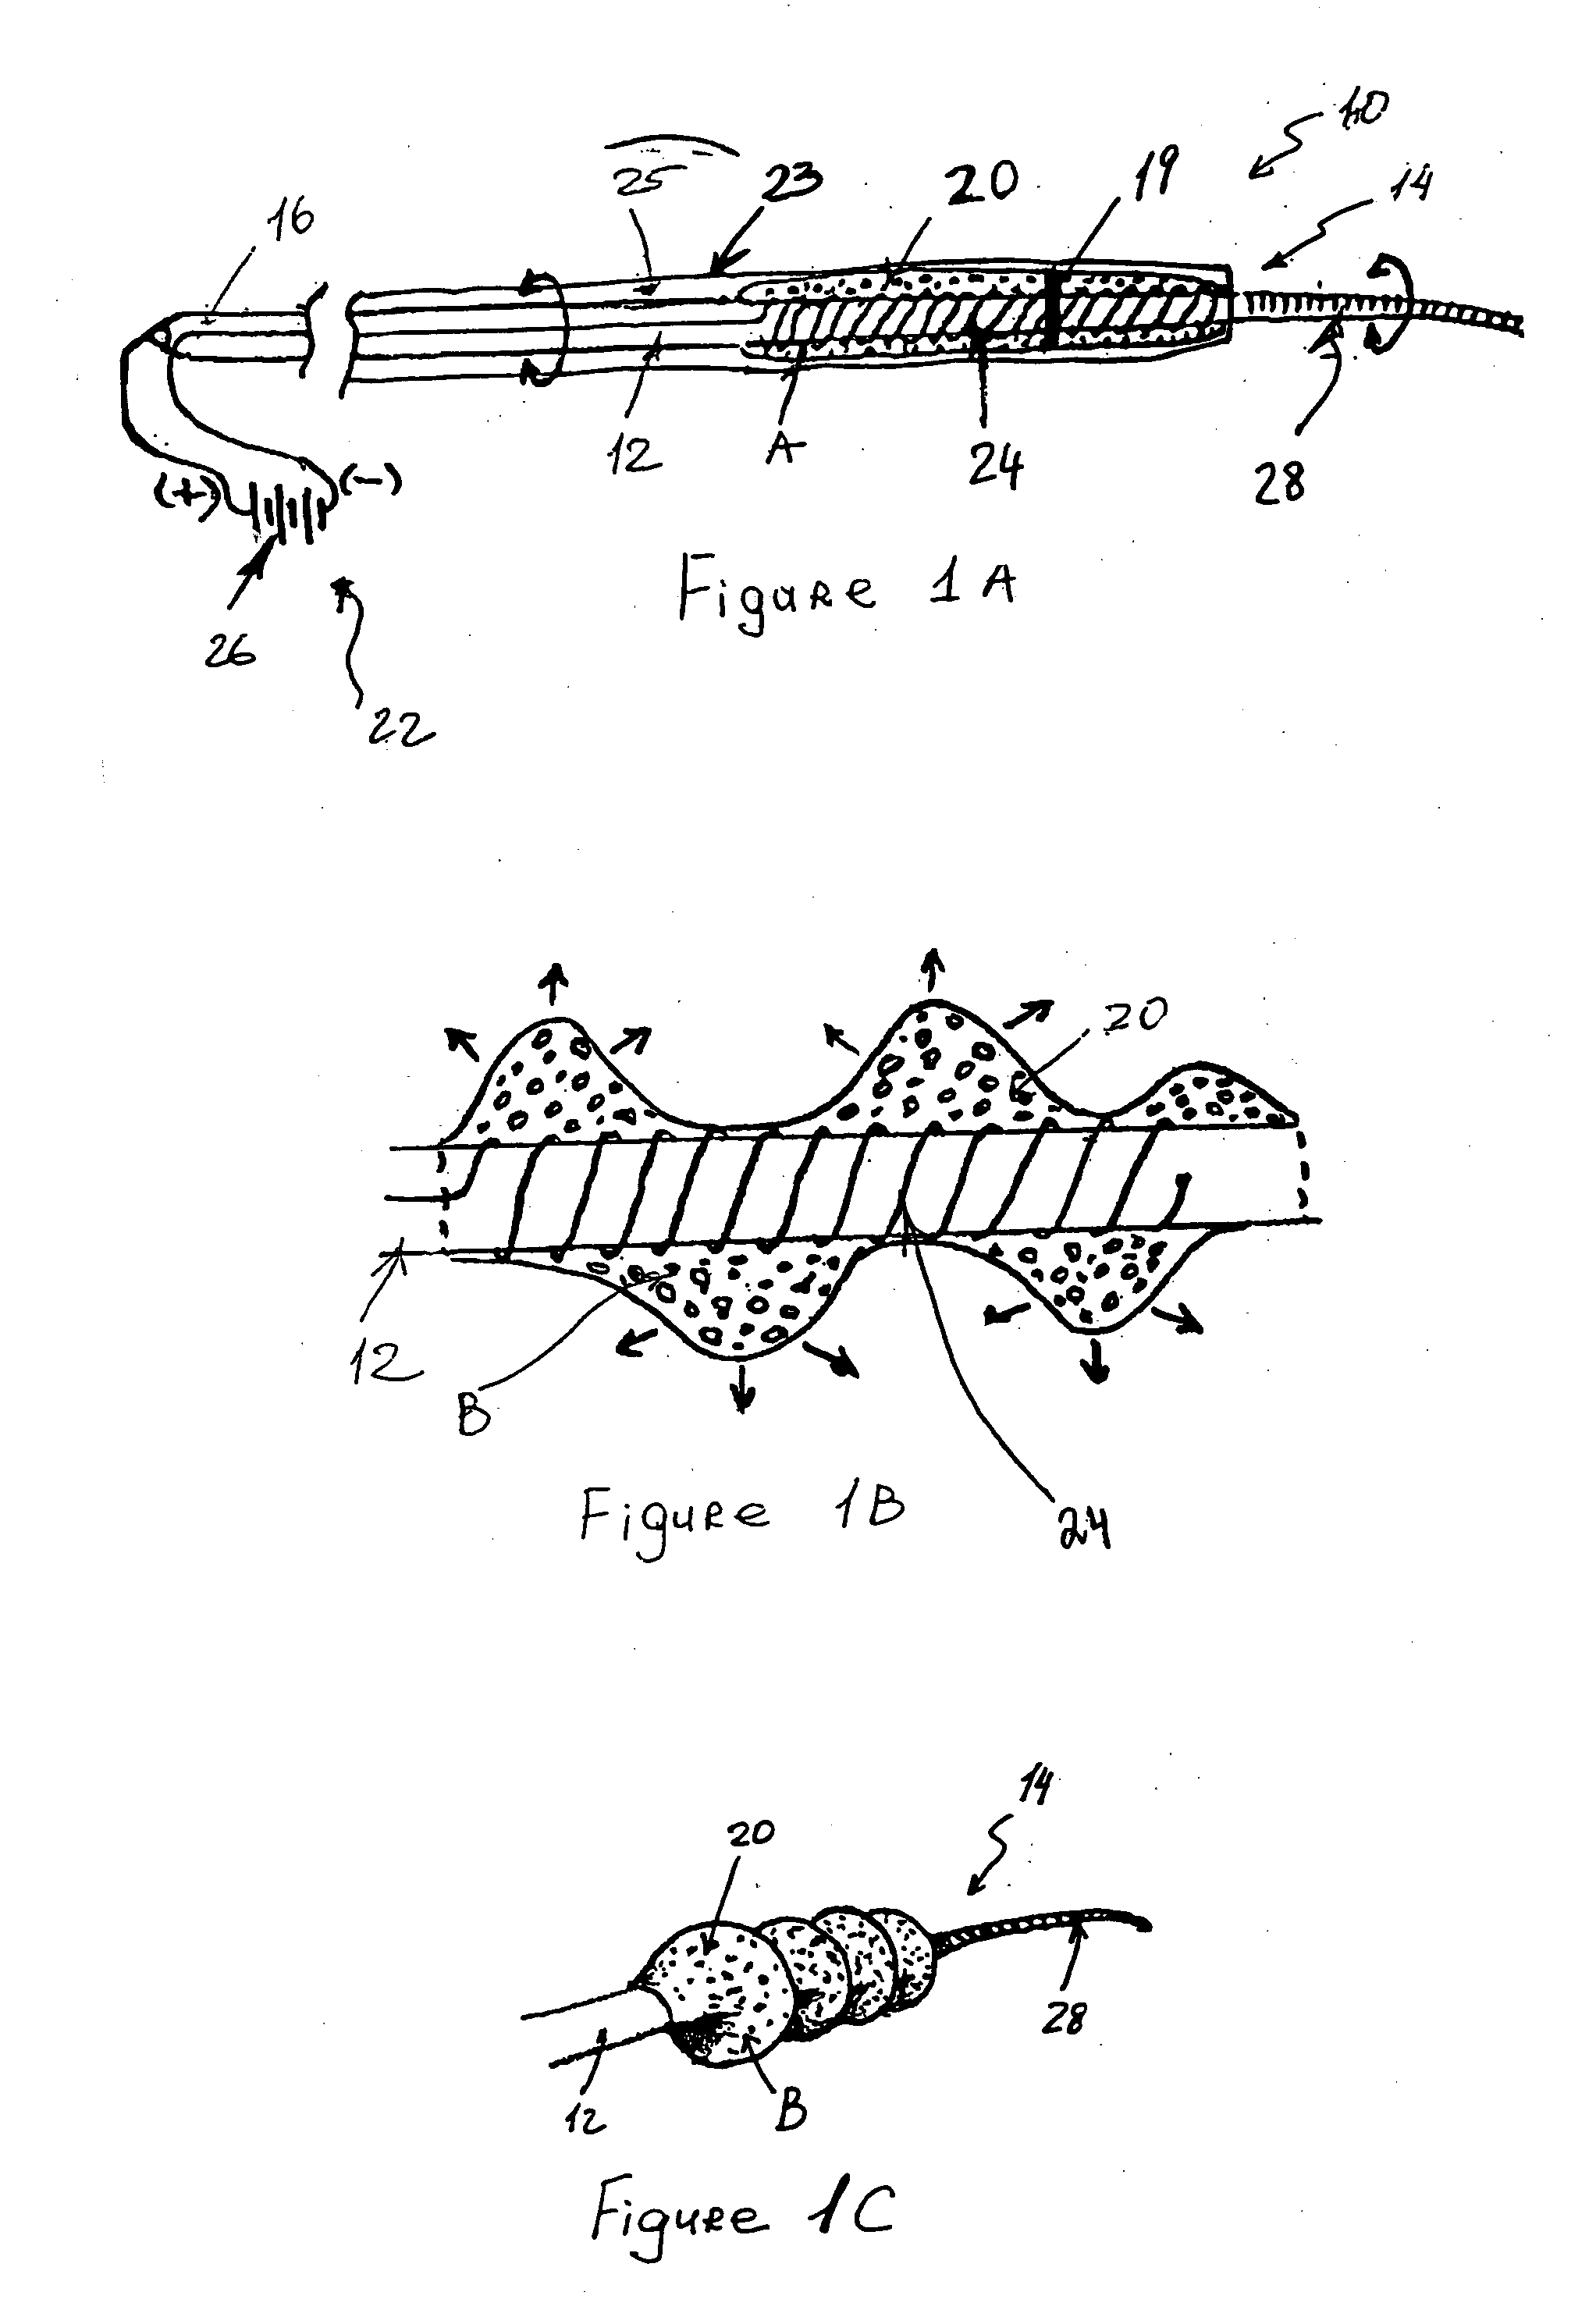 Devices and methods for removing a matter from a body cavity of a patient